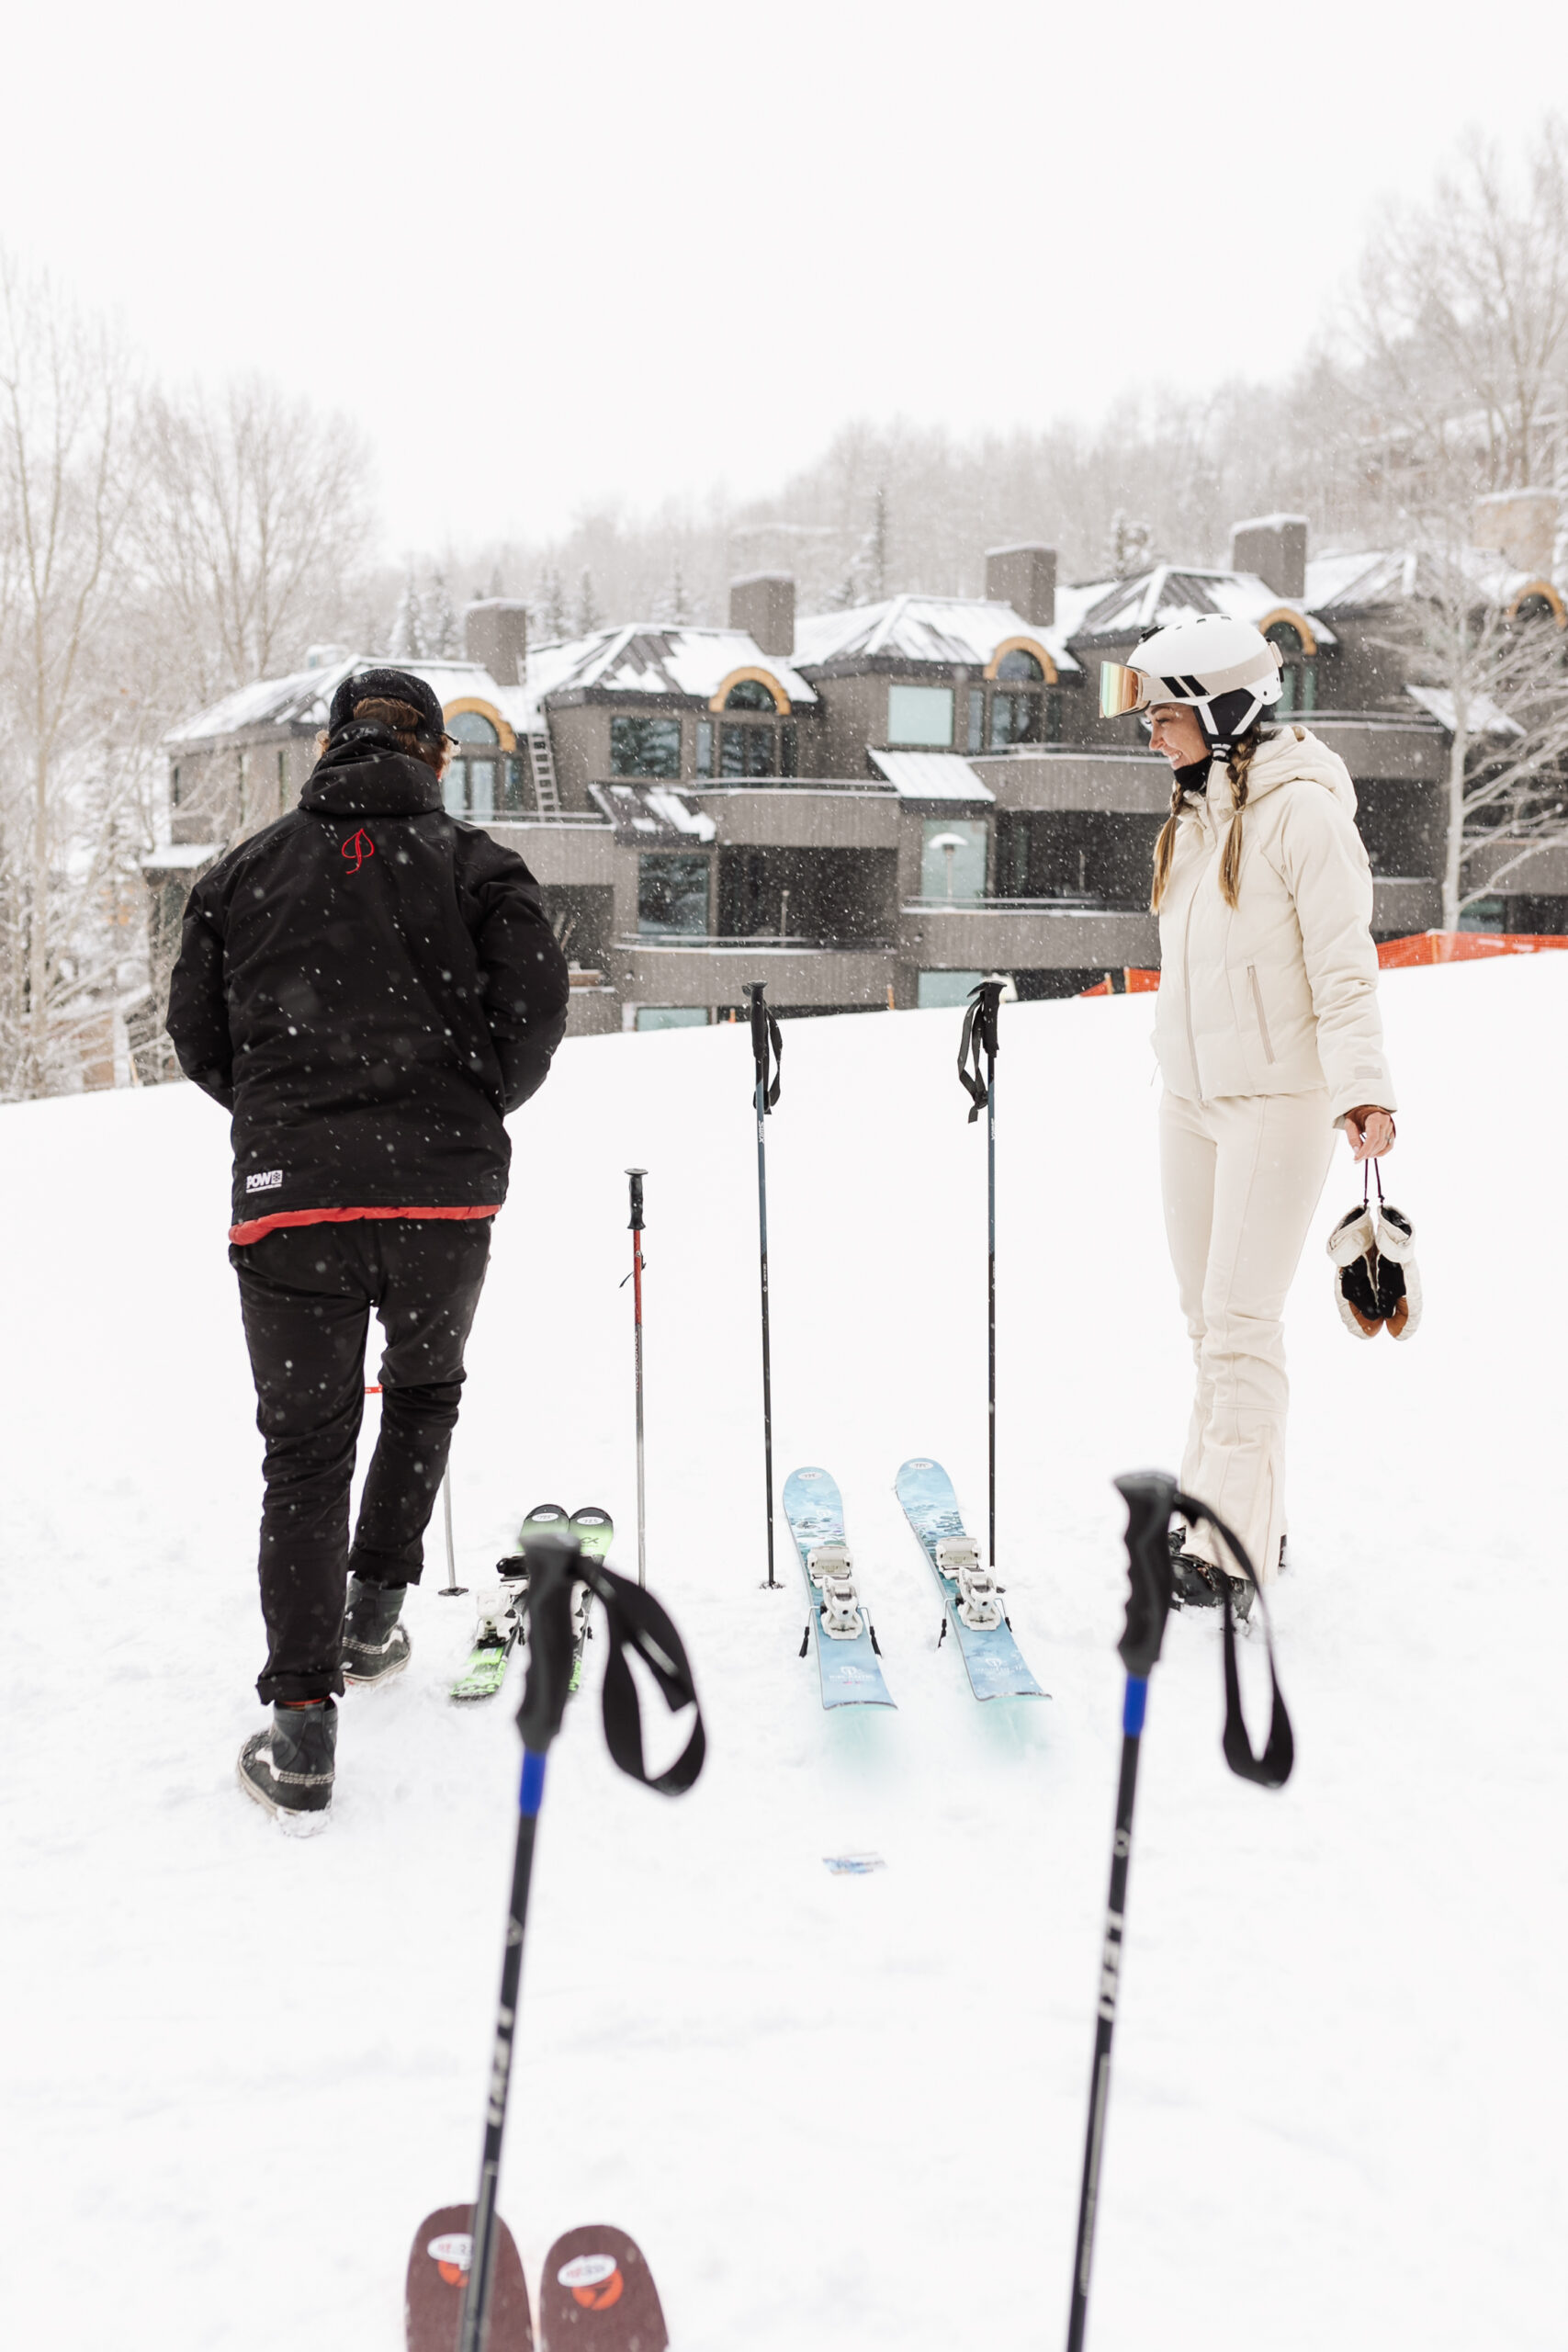 such a luxury to have our skis and gear on the snow ready for us! #viceroysnowmass does it right! #skivalet #luxurytravel